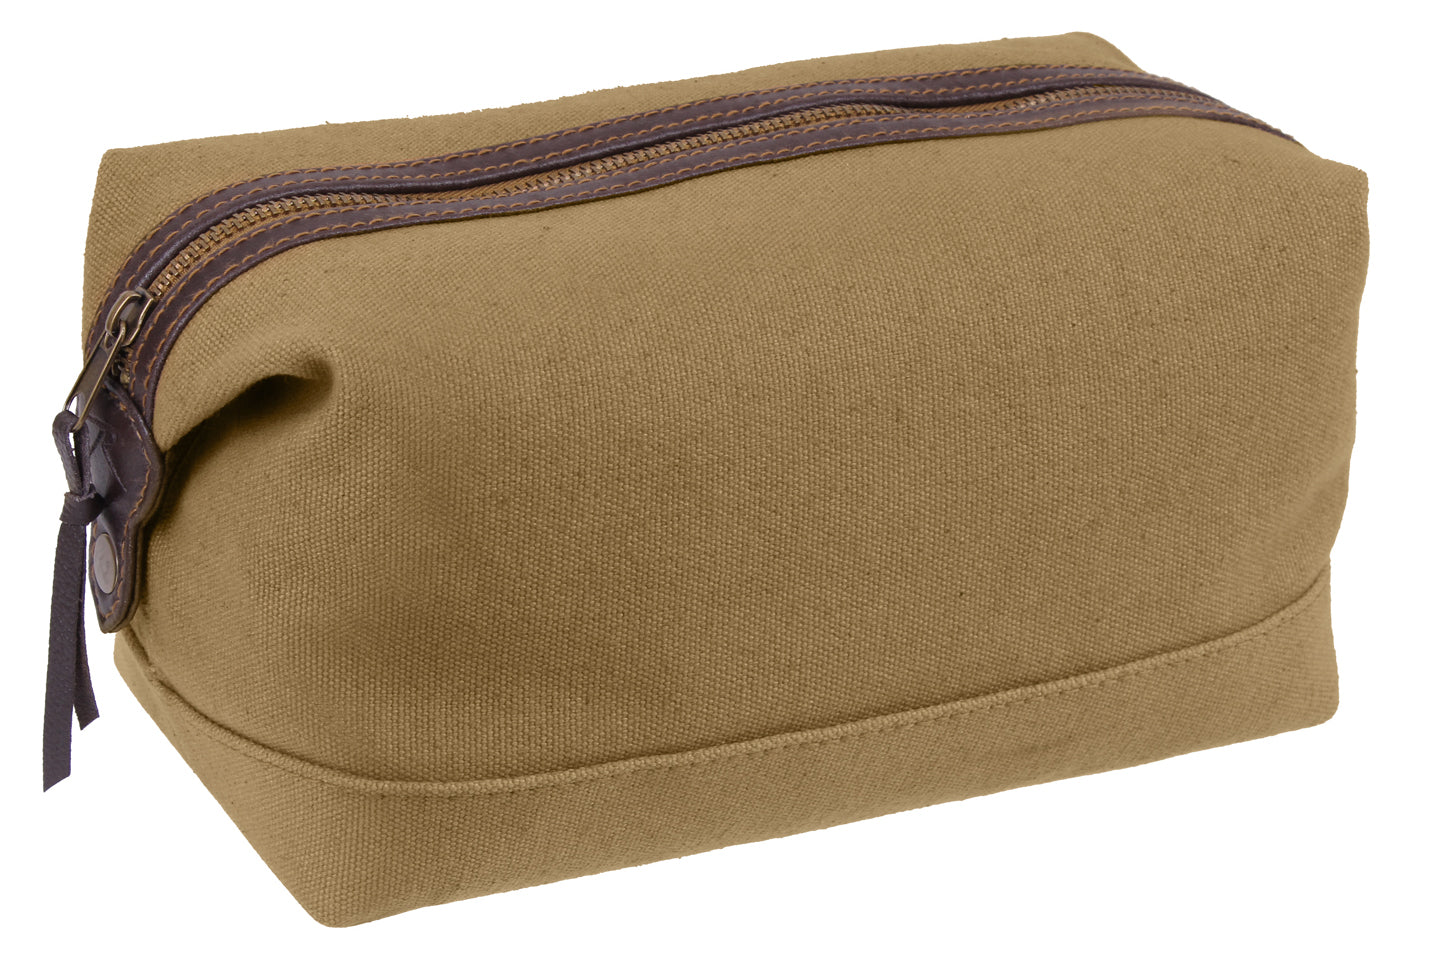 Show Me Love Brand Canvas and Leather Travel Toiletry Bag - SHOW ME LOVE